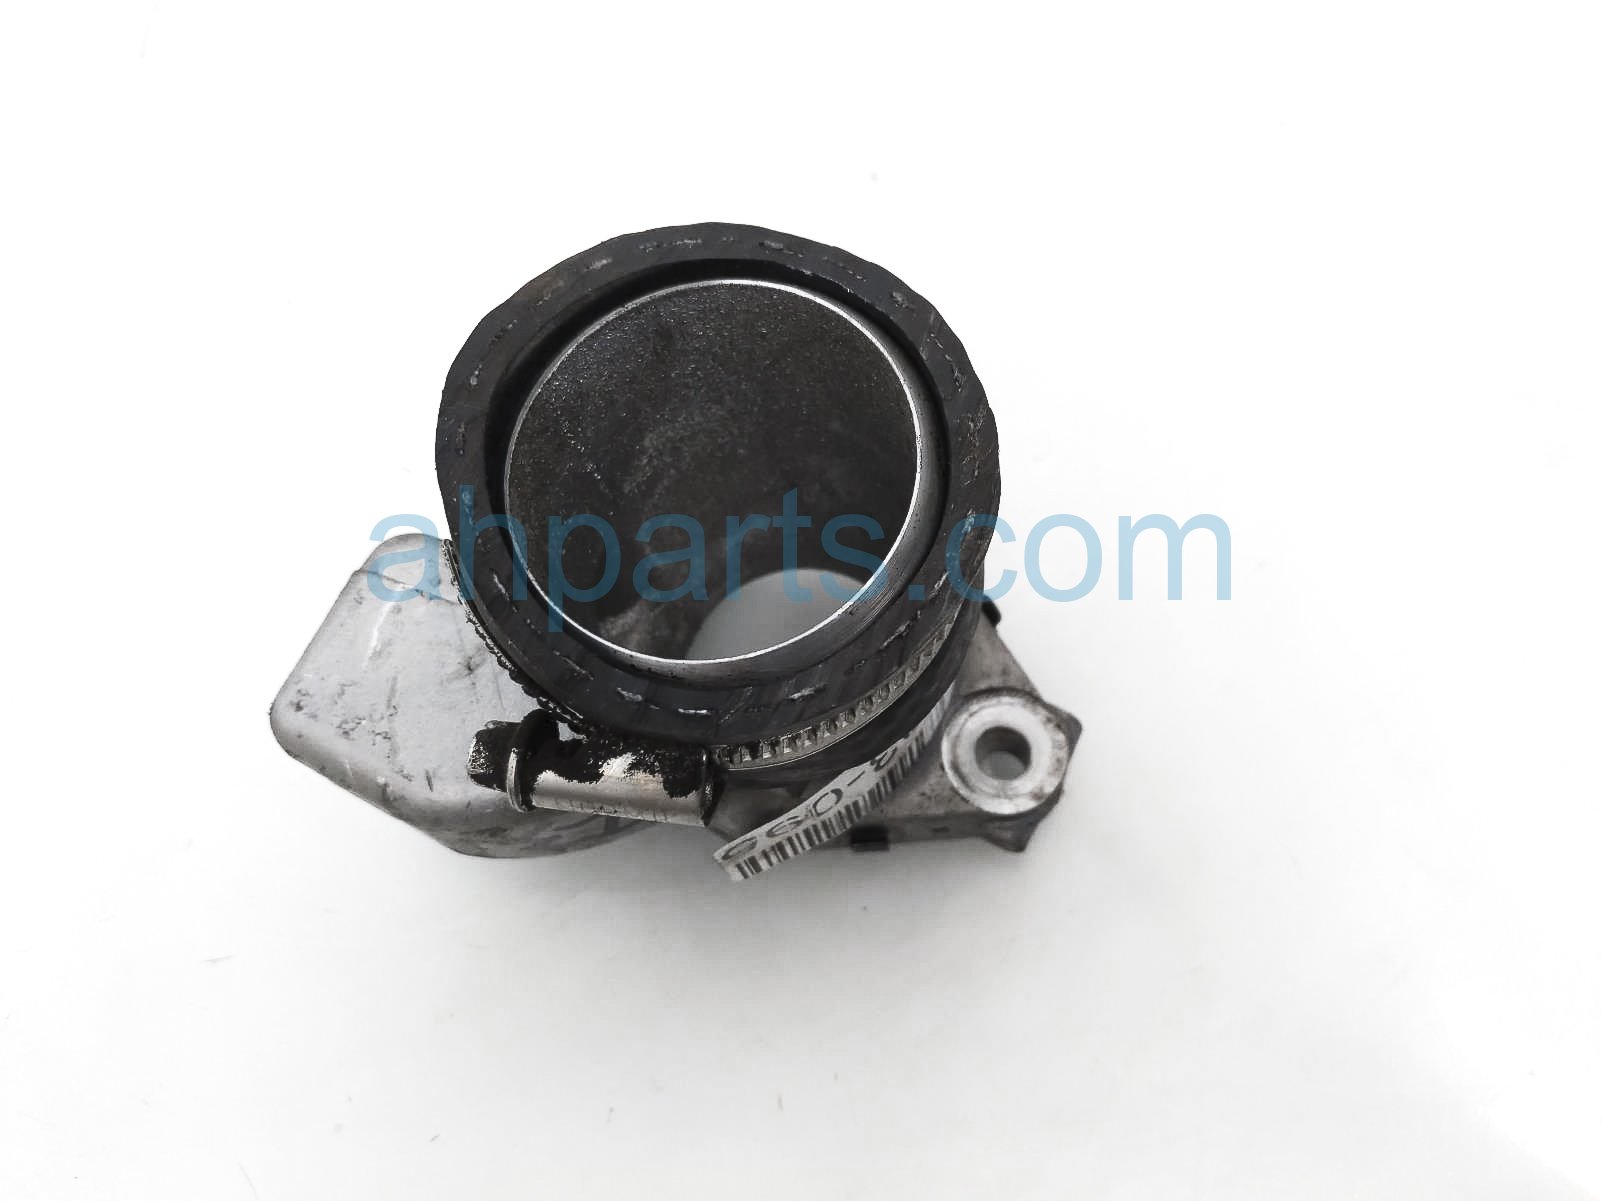 $20 Acura TURBOCHARGER OUTLET PIPE JOINT